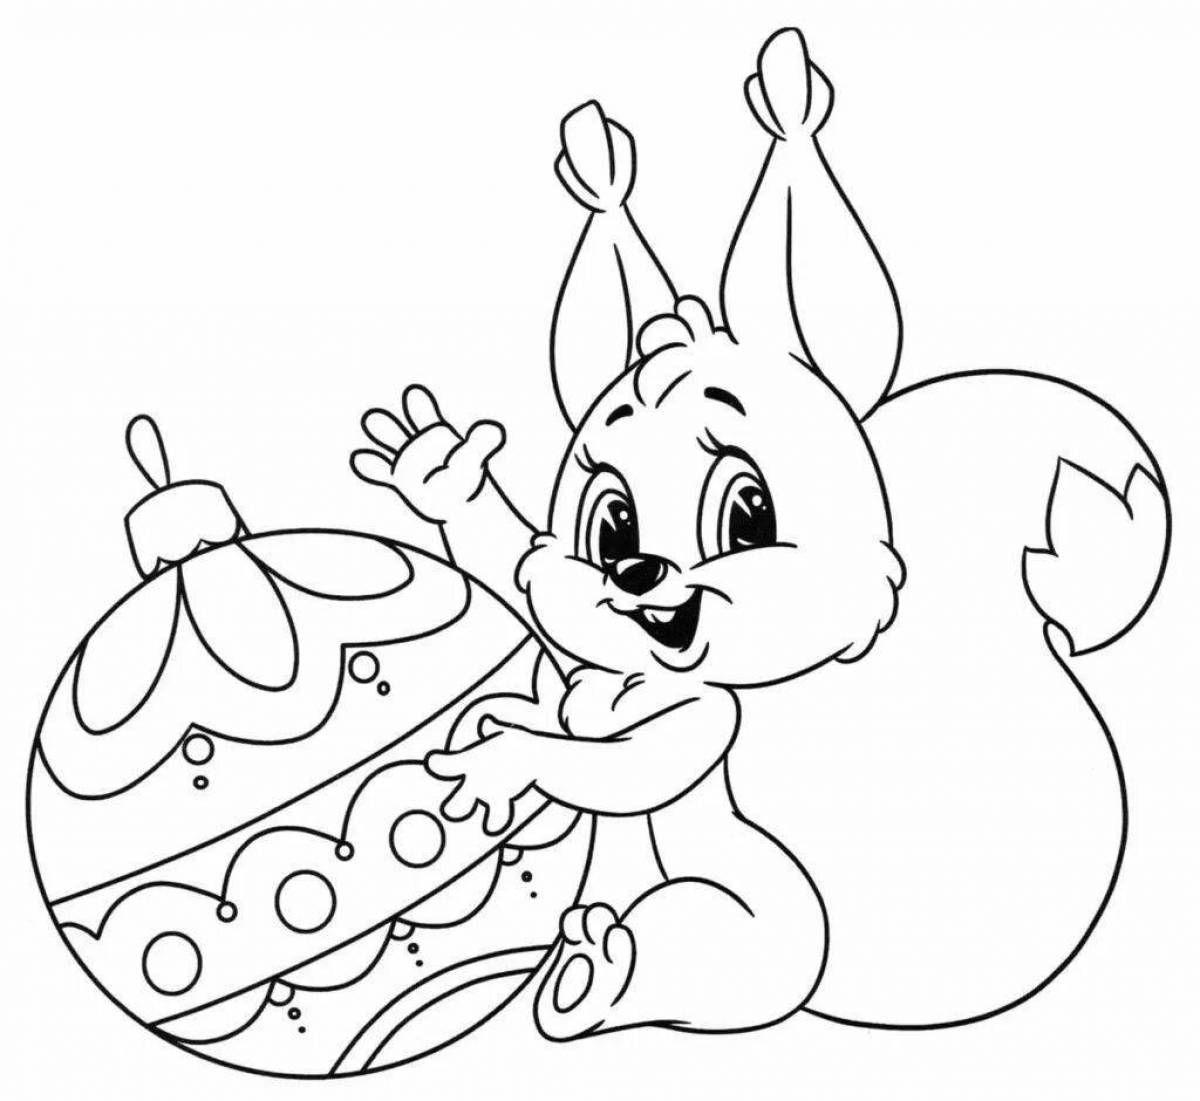 Glorious new year bunny coloring book